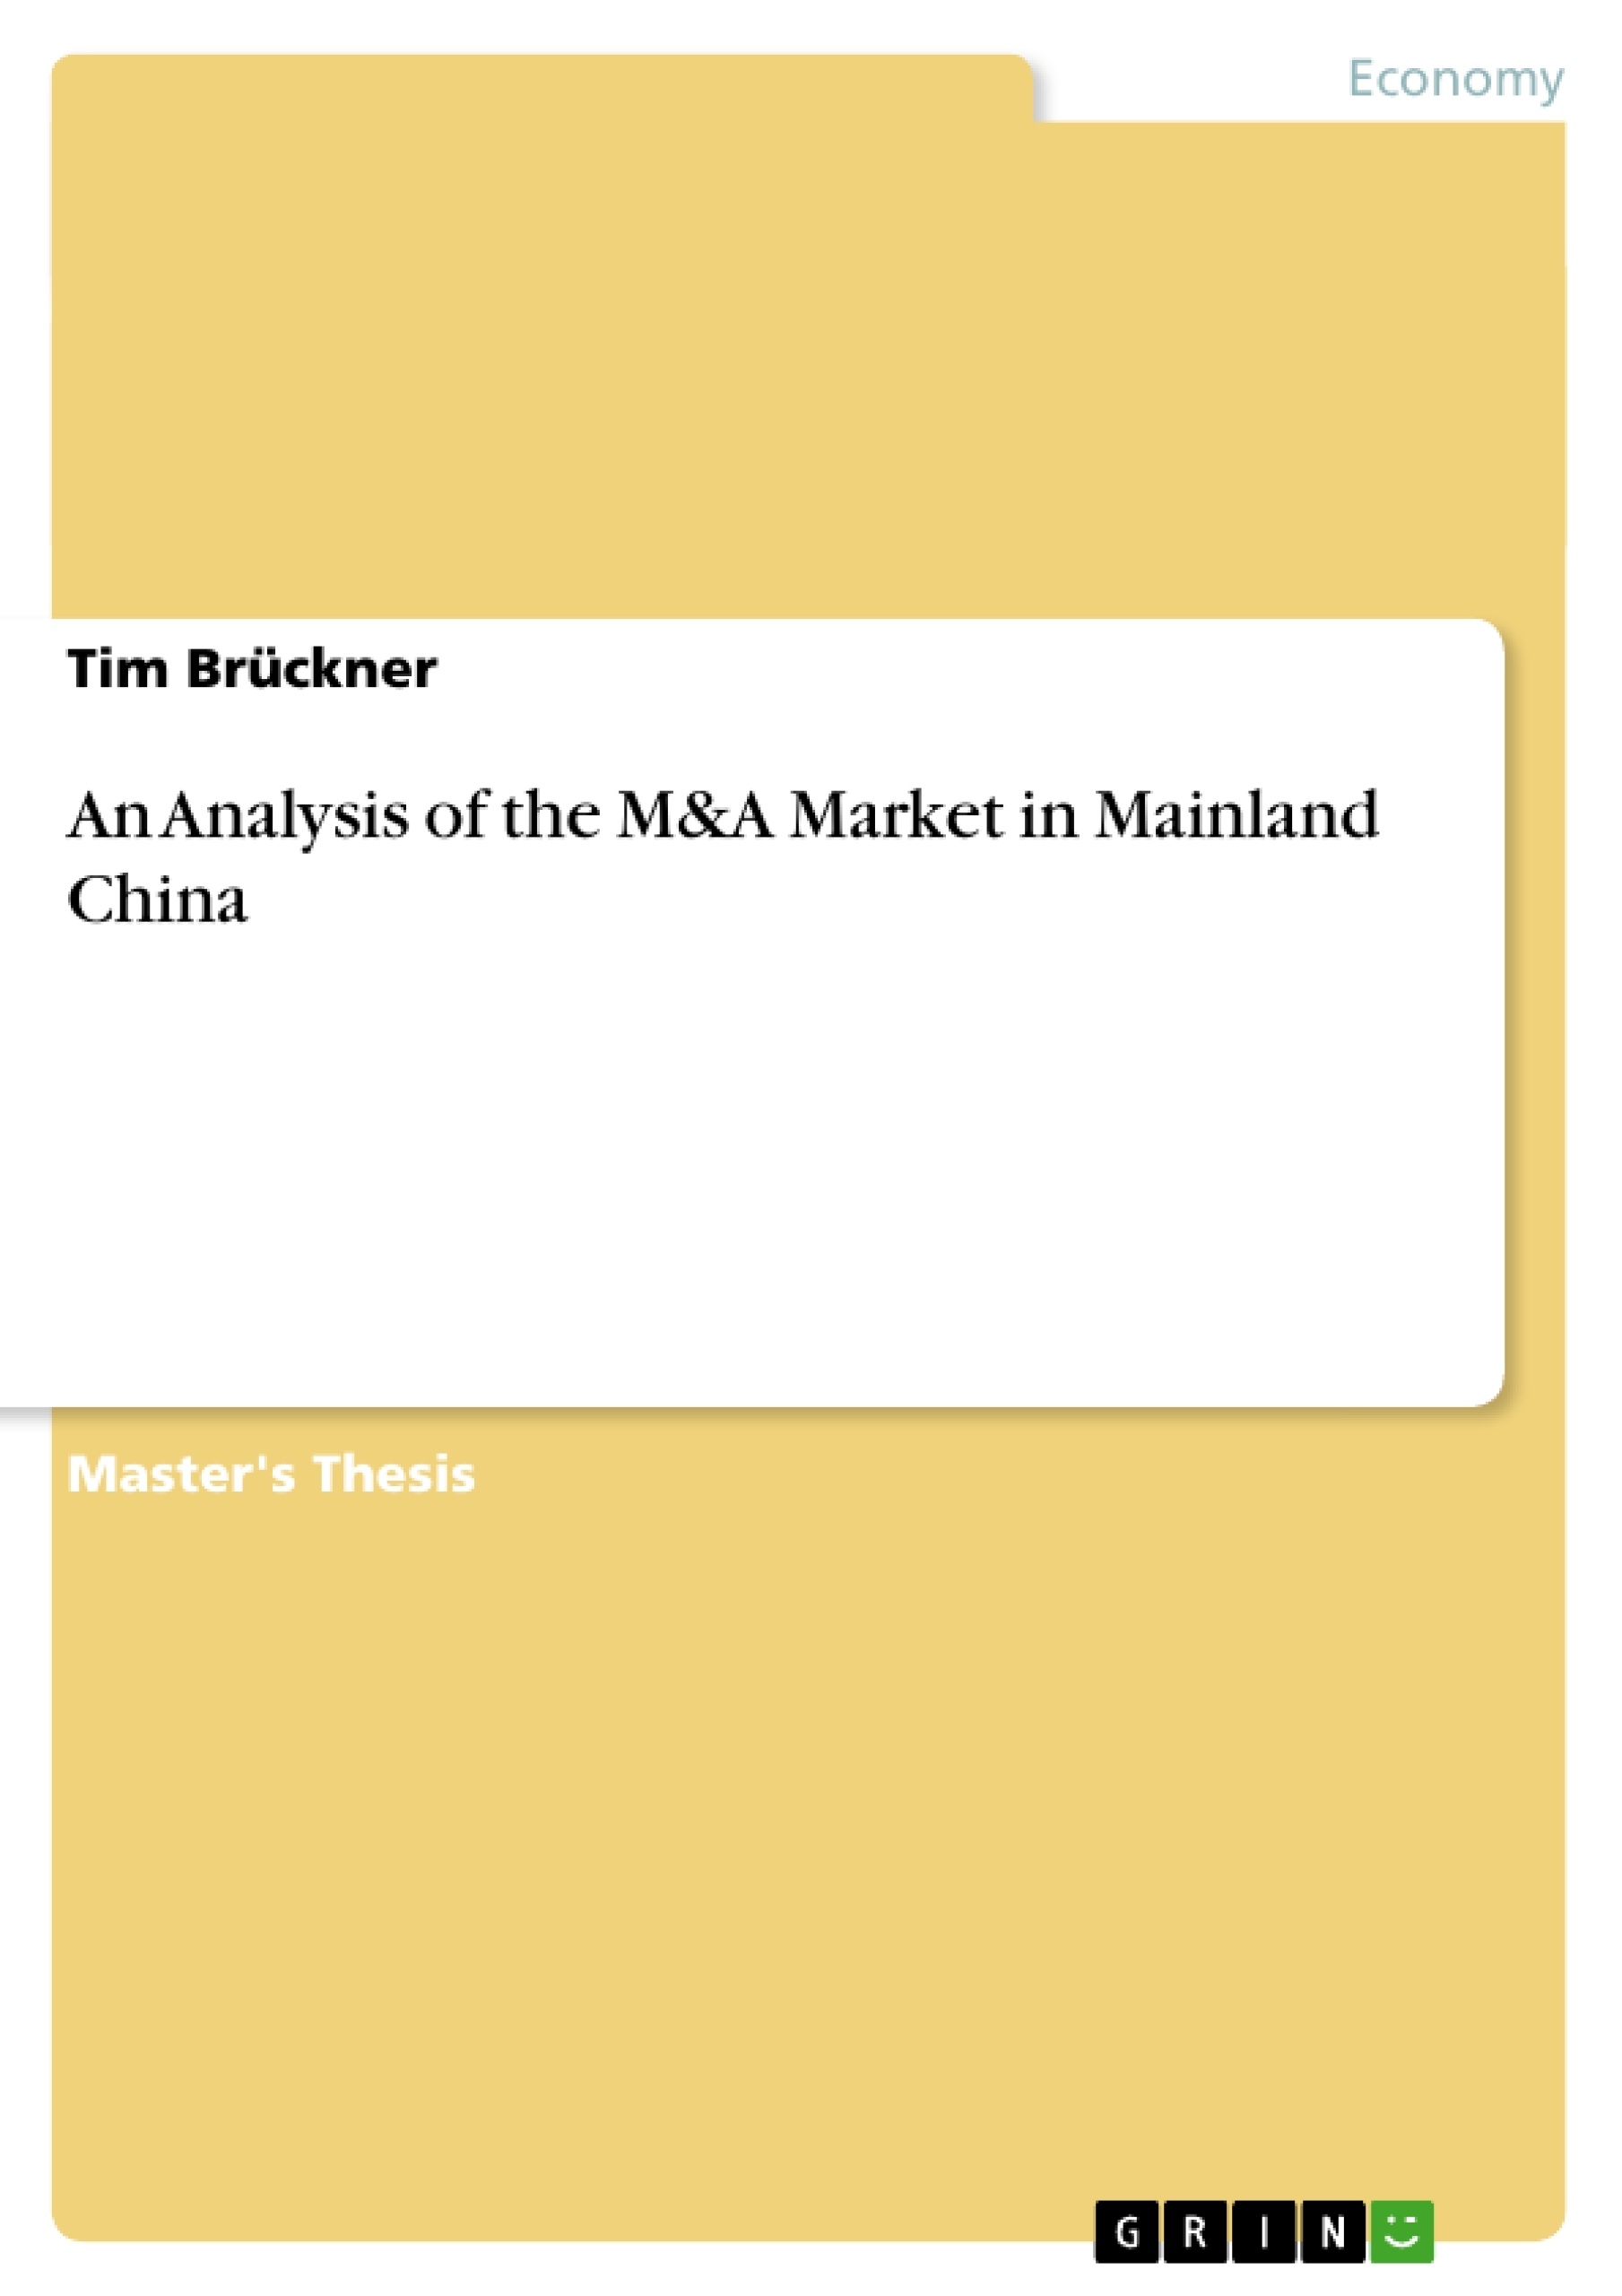 Title: An Analysis of the M&A Market in Mainland China